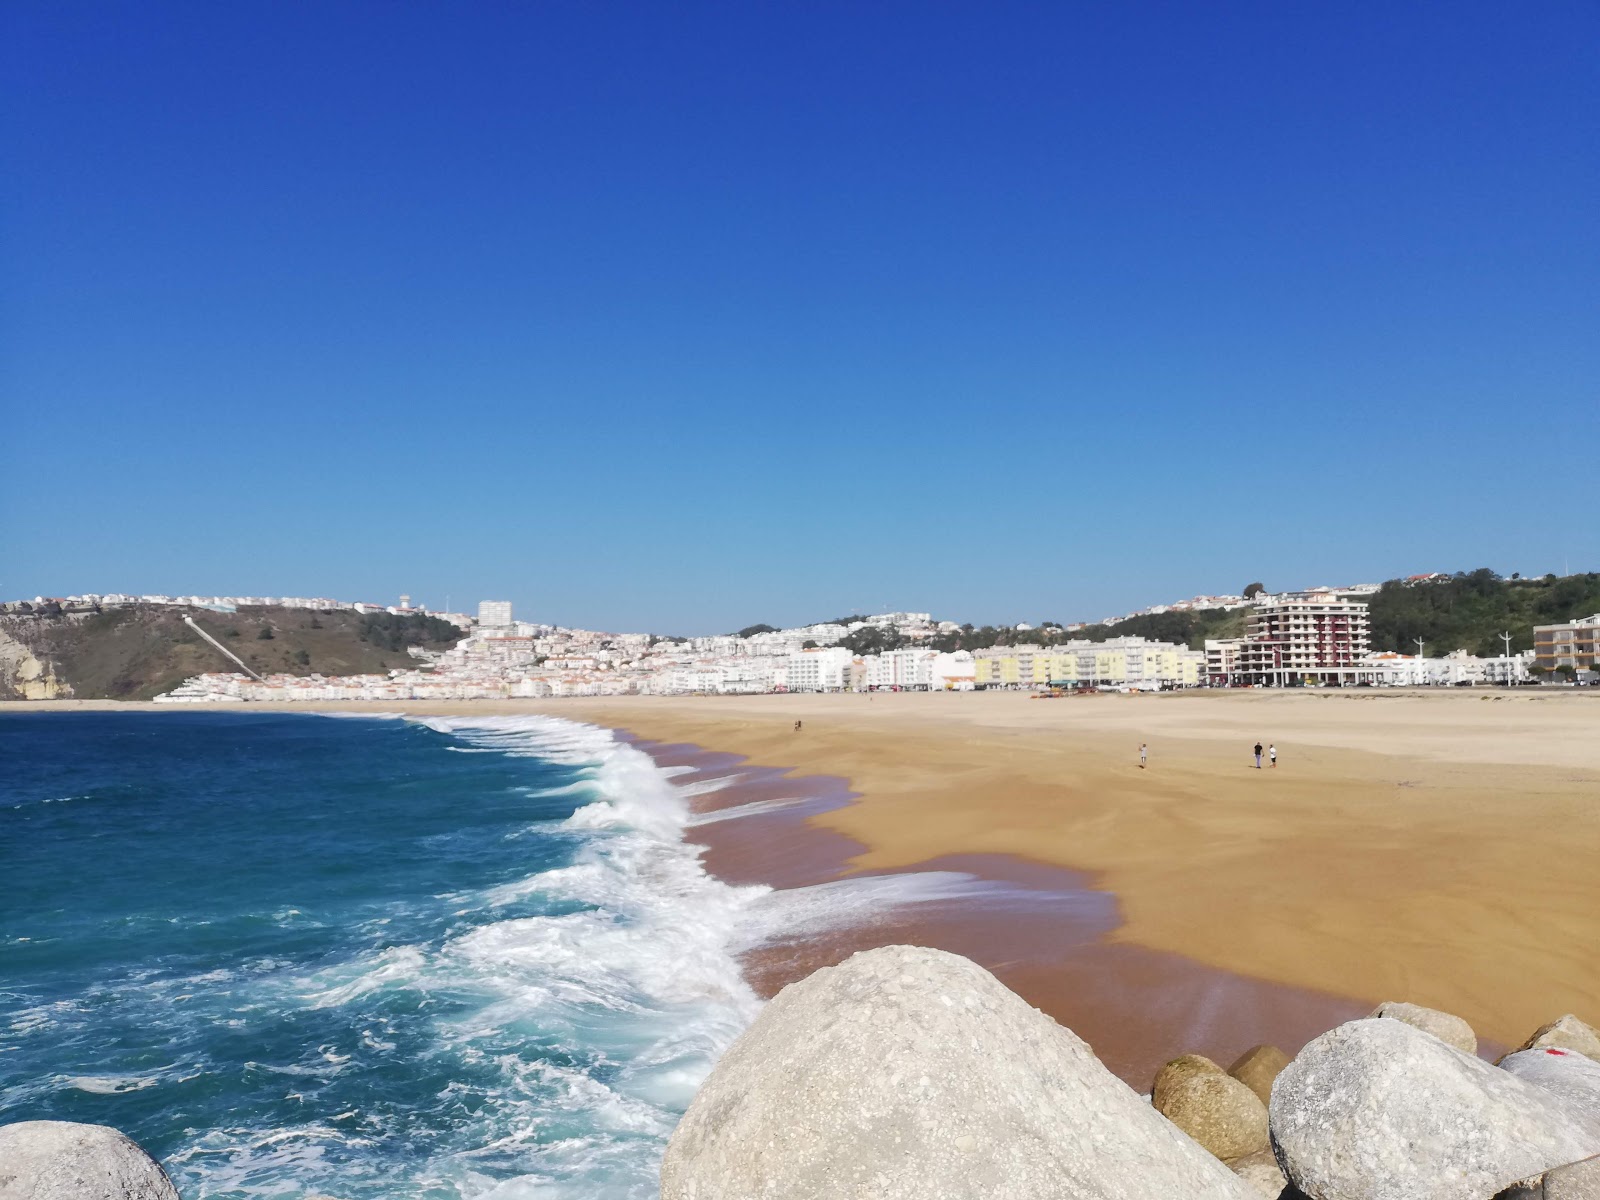 Photo of Nazare Beach with long straight shore